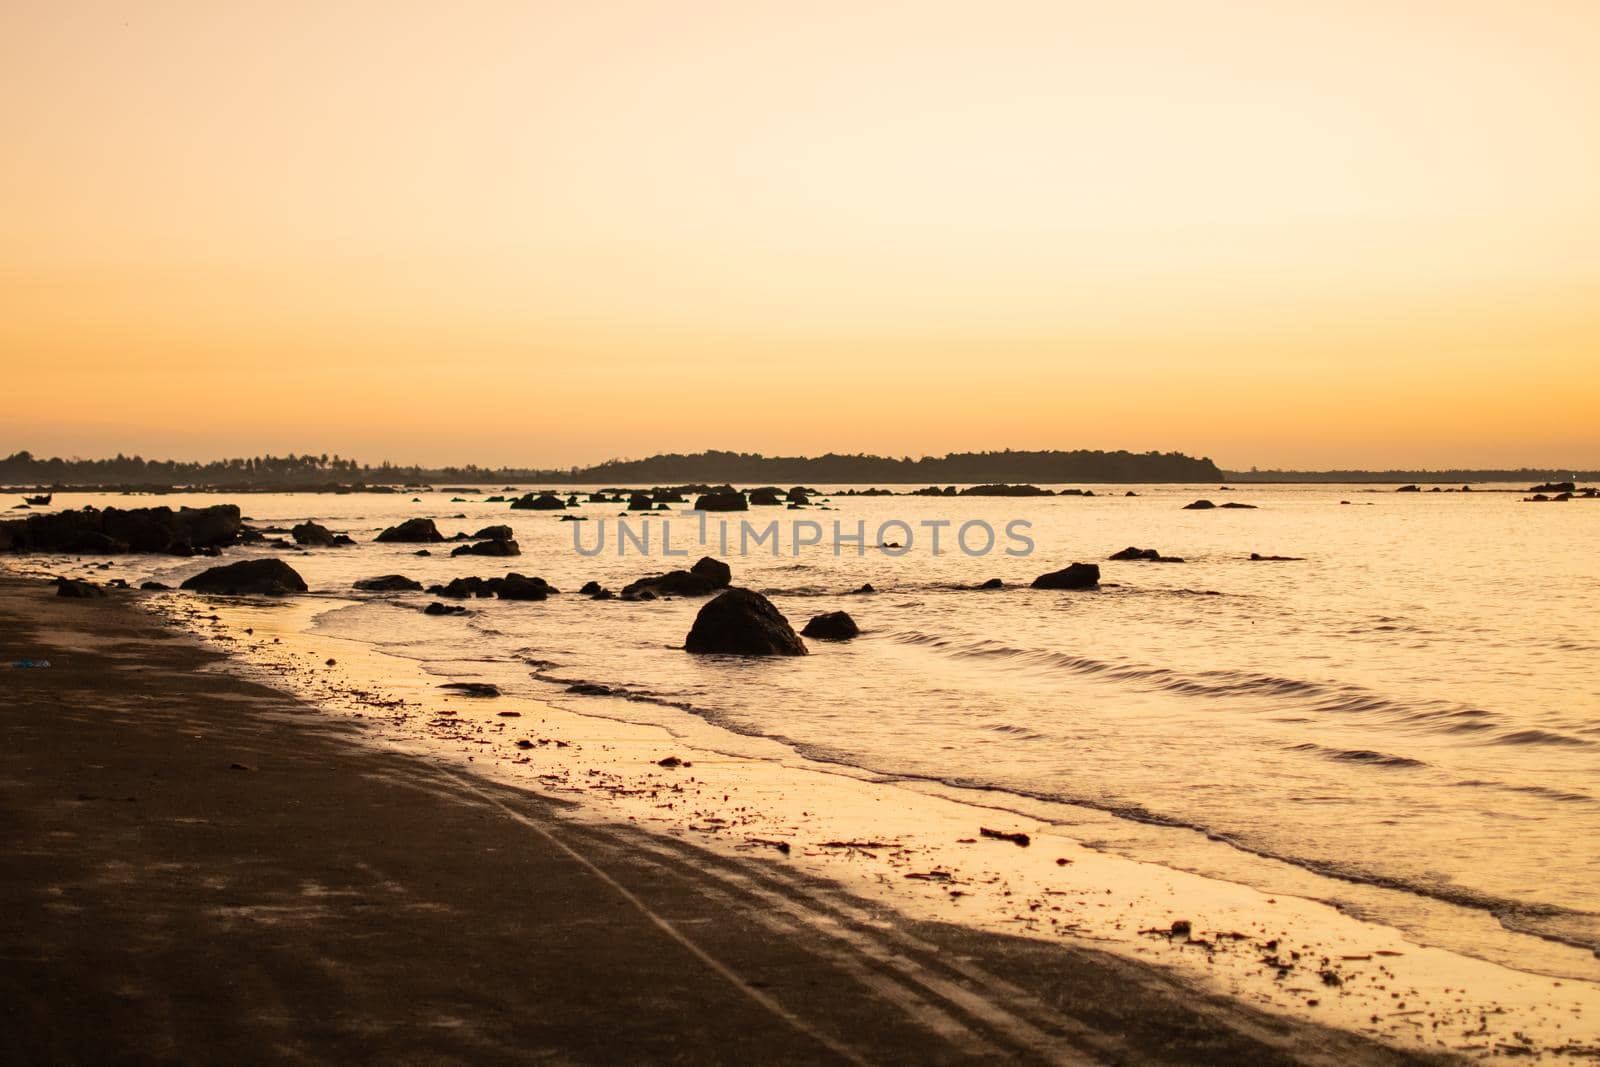 Golden sunset over a beach with rocks in the waves near Ngwesaung, Myanmar by arvidnorberg